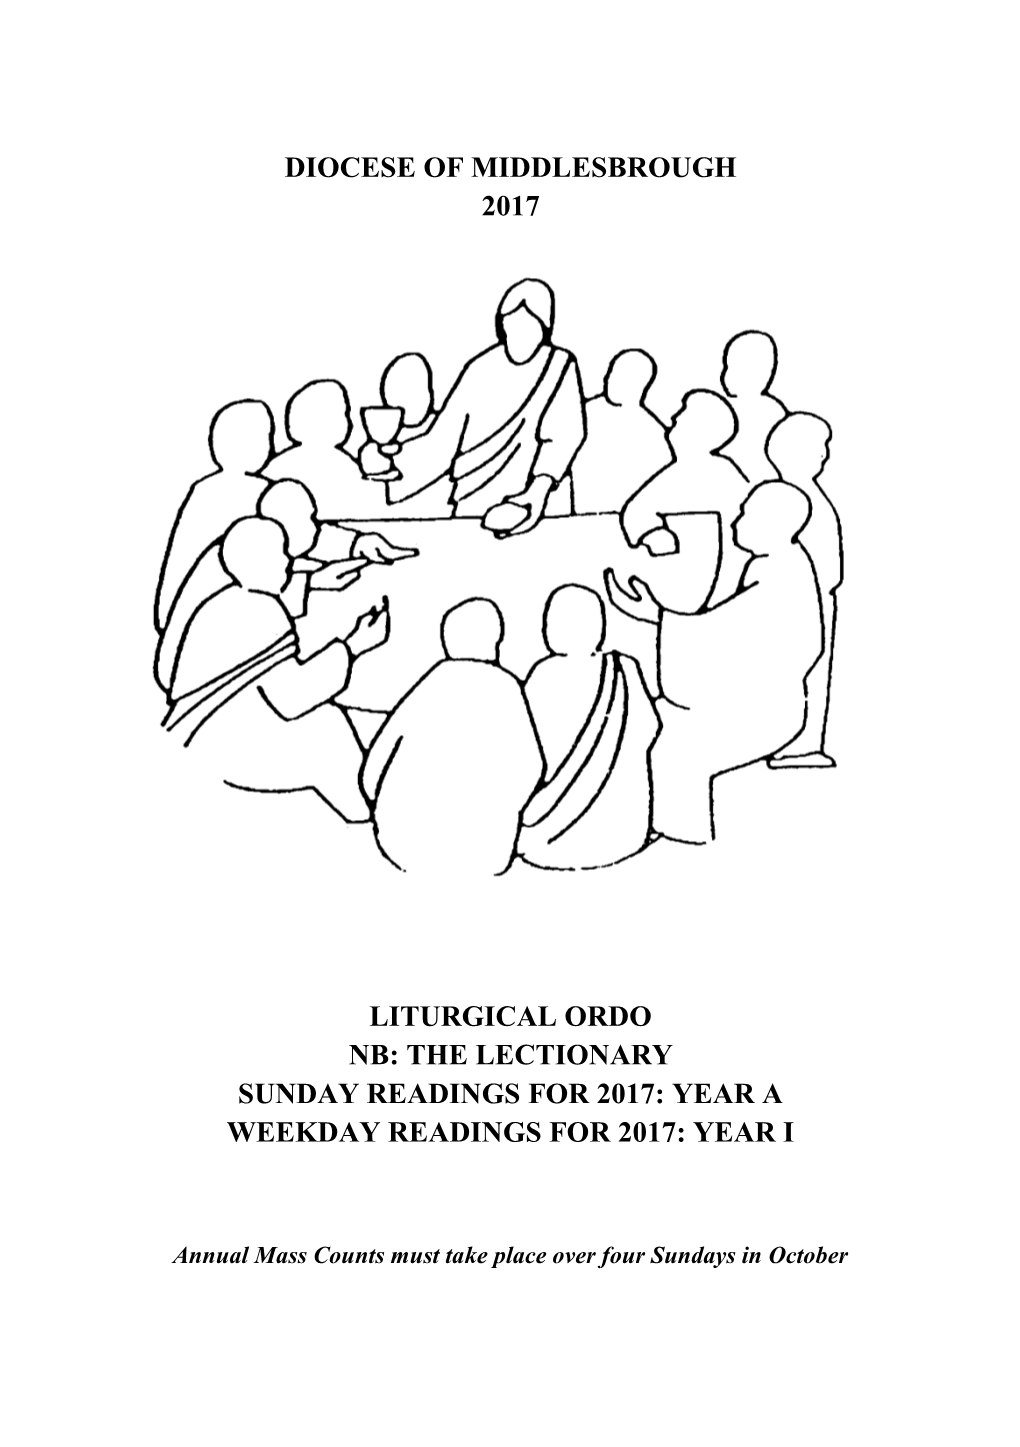 Diocese of Middlesbrough 2017 Liturgical Ordo Nb: The